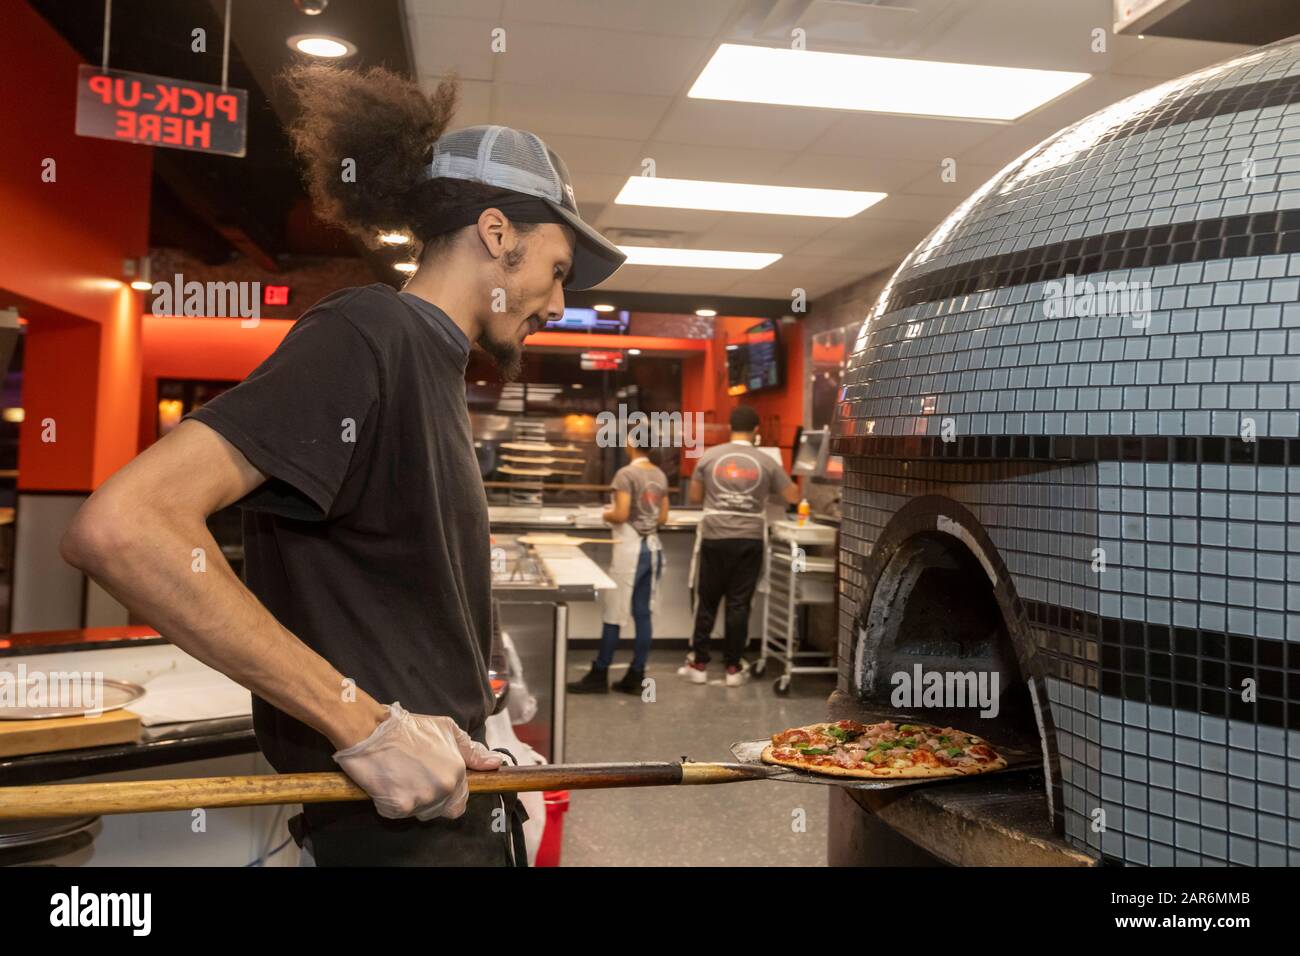 Detroit, Michigan - A worker bakes a pizza in a brick oven at the Flamz Pizzeria in the city's Morningside neighborhood. The restaurant offers made to Stock Photo